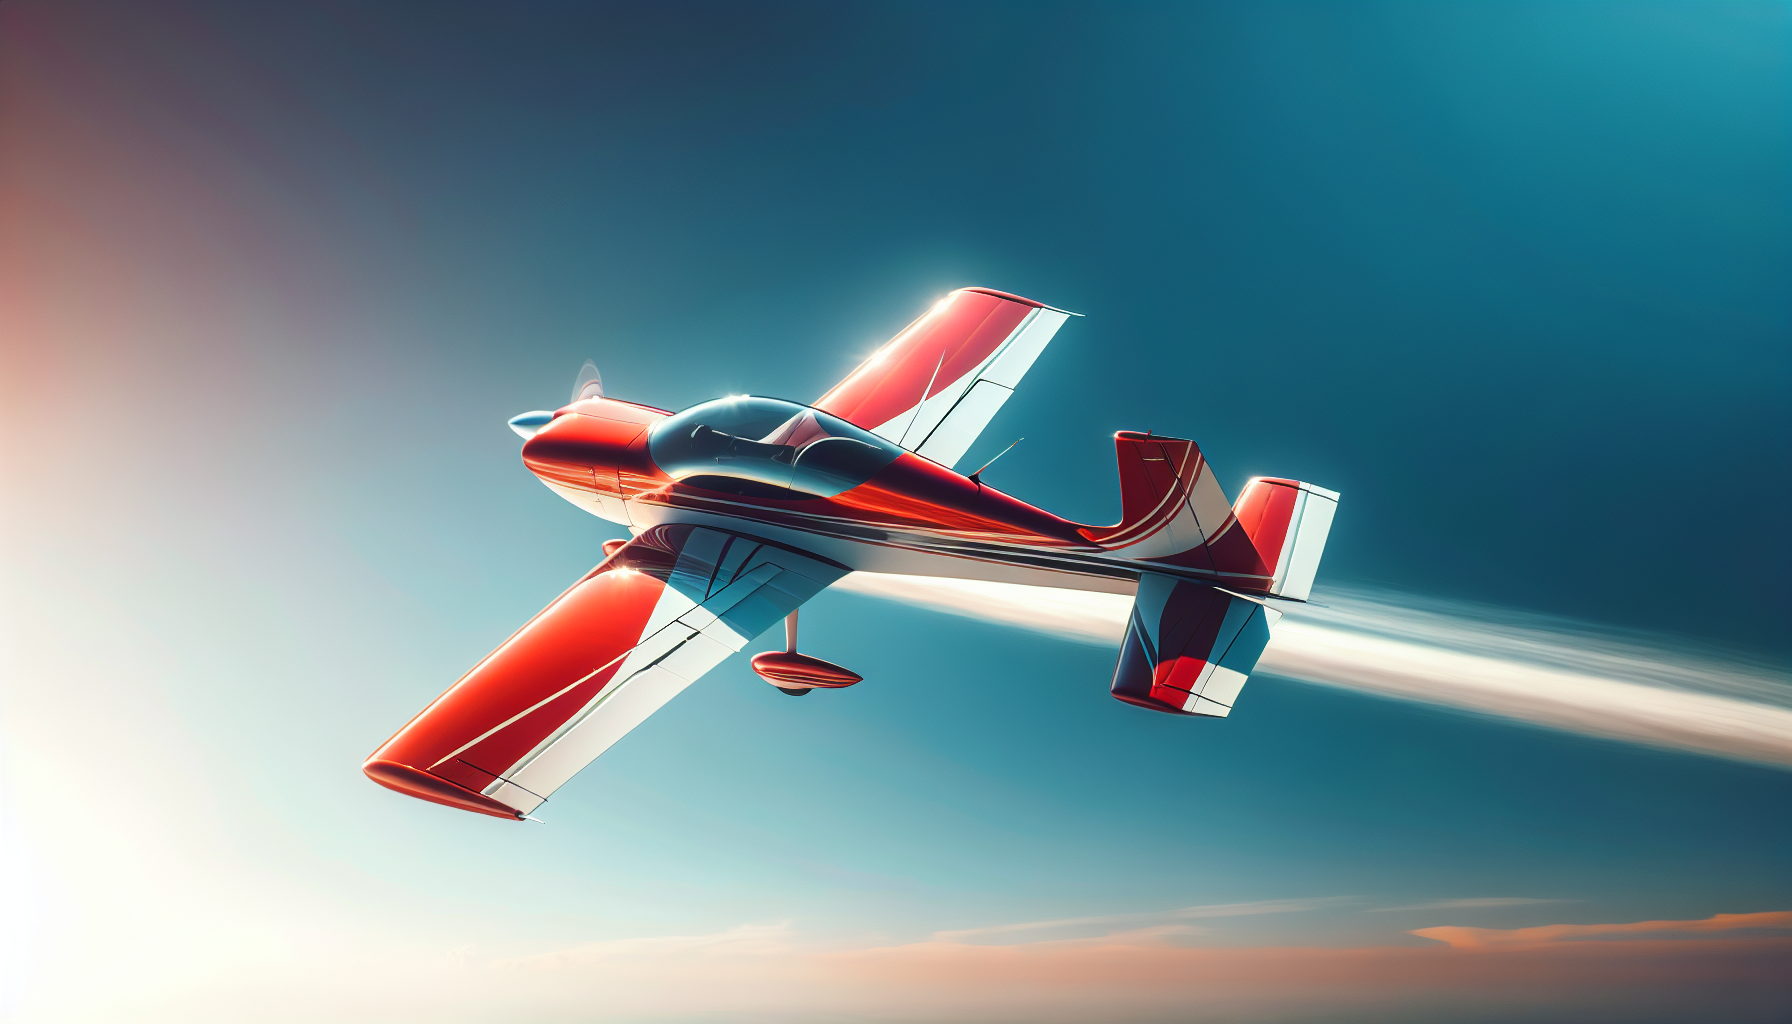 Light sport aircraft flying in the sky